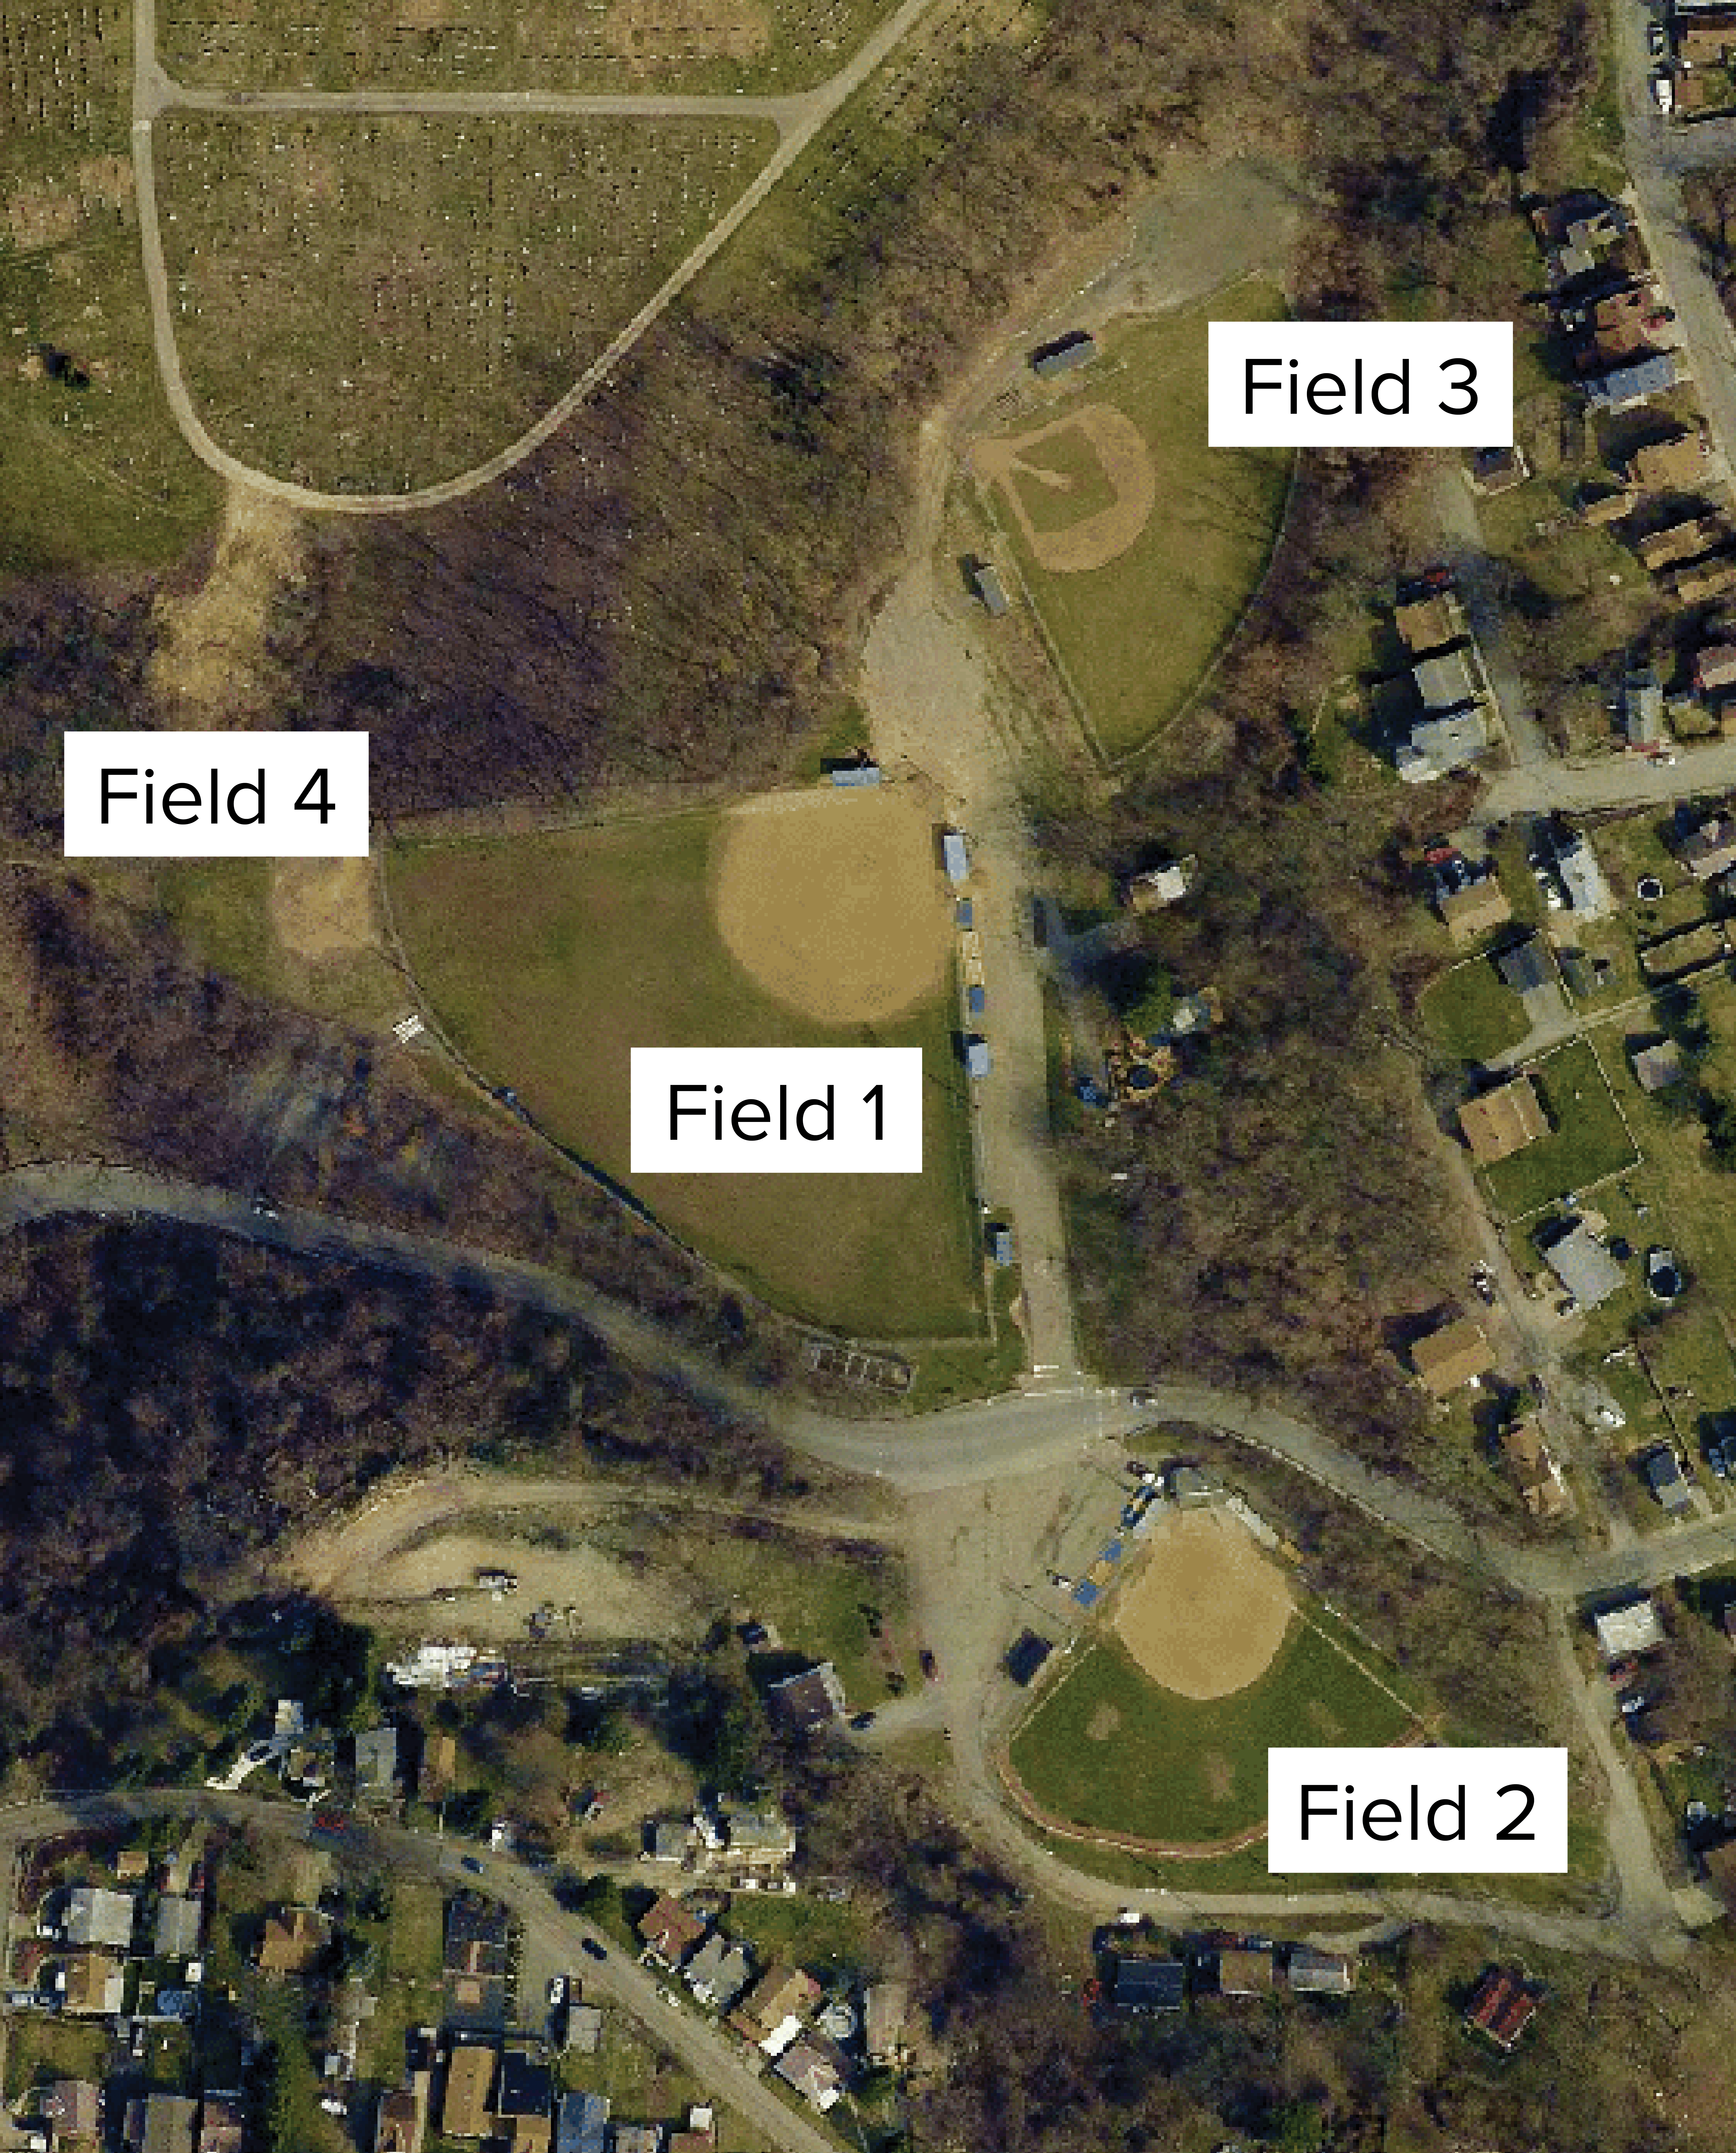 Map of Volunteers Field park with the ballfield names labeled